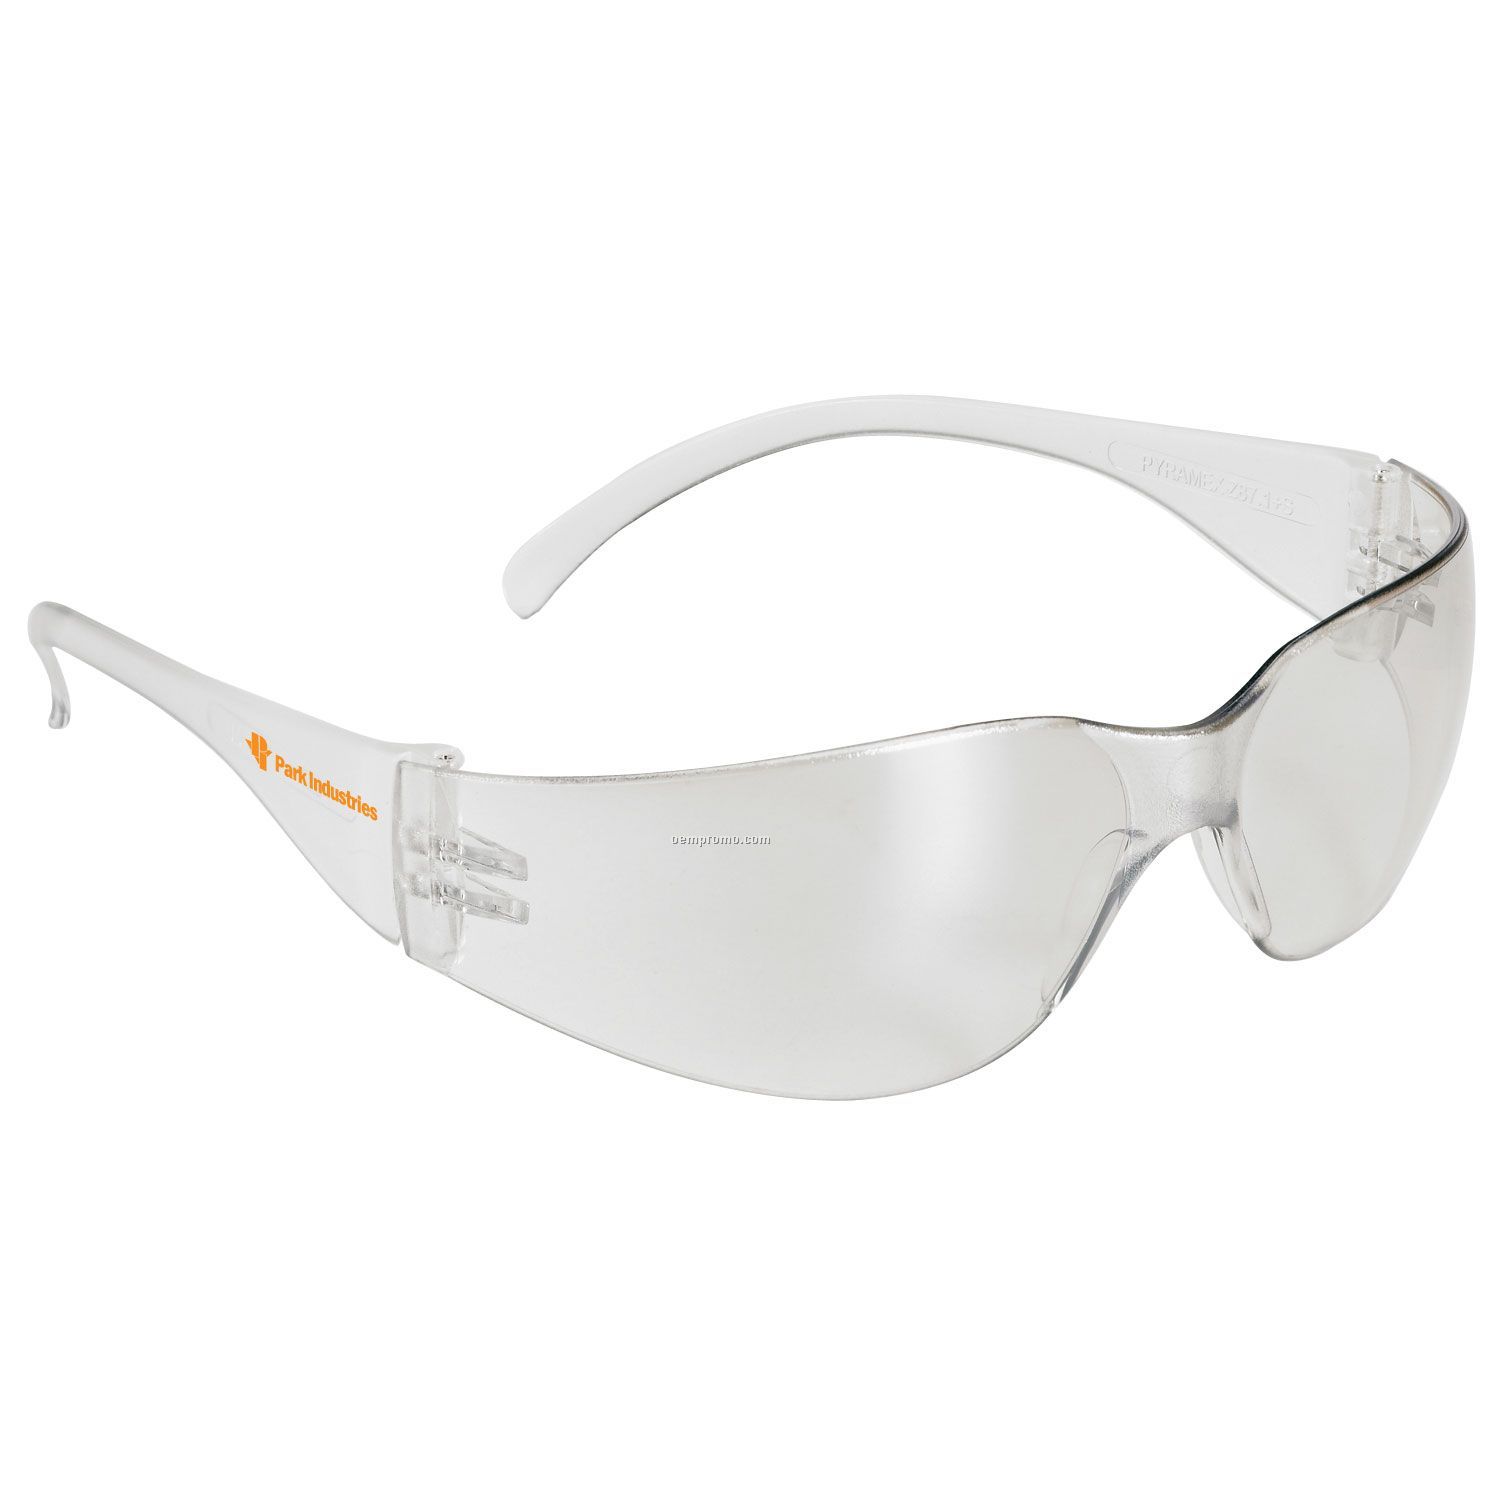 Polycarbonate Lens & Temple Safety Glasses